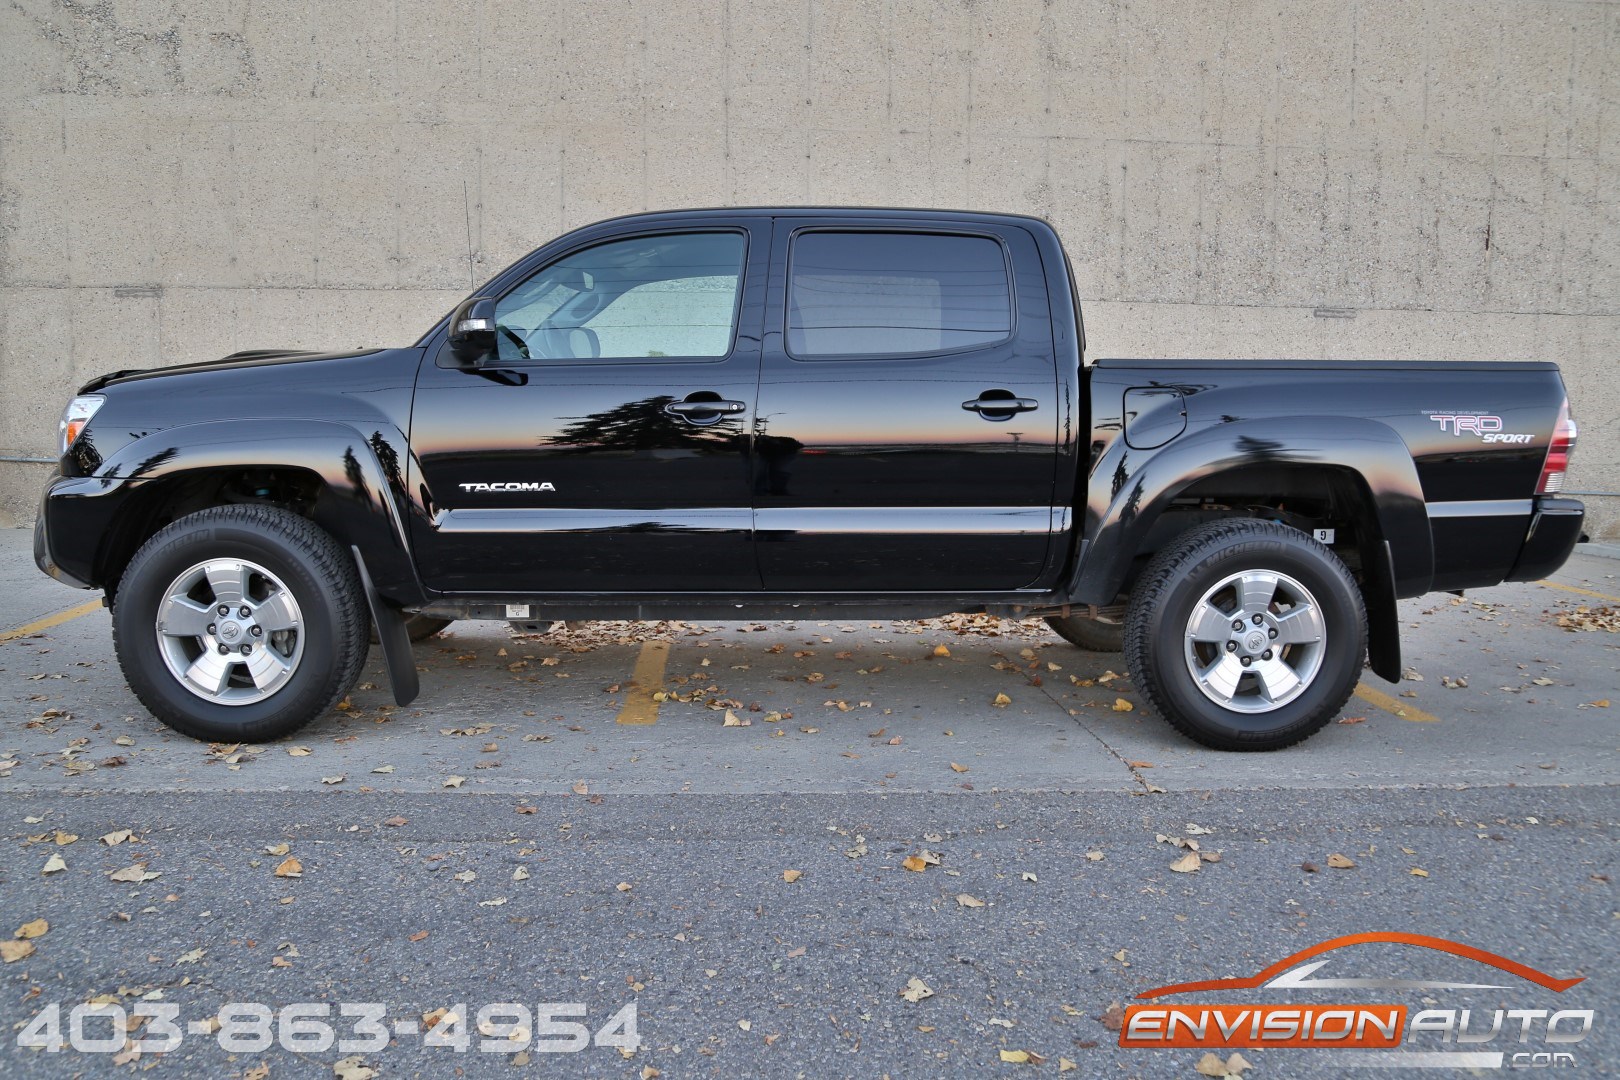 Toyota Tacoma Trd Or With 6 Speed Manual Transmission